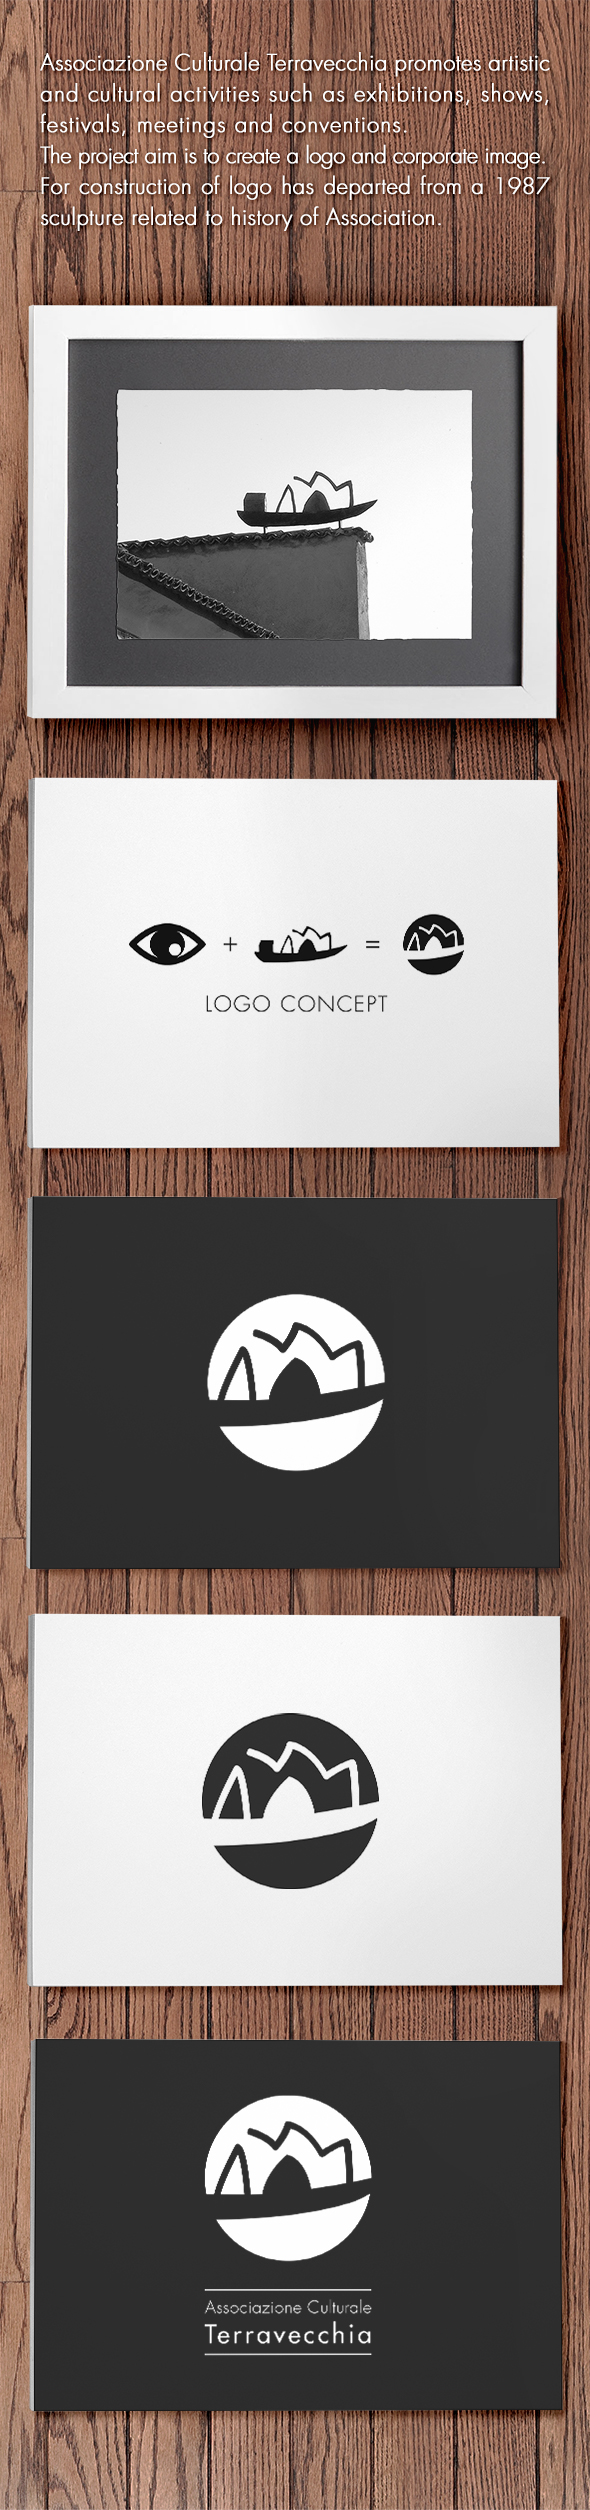 logo brand Logotype brand identity Mockup business card stationary inspiration design guideline graphic letterpress concept type made in italy